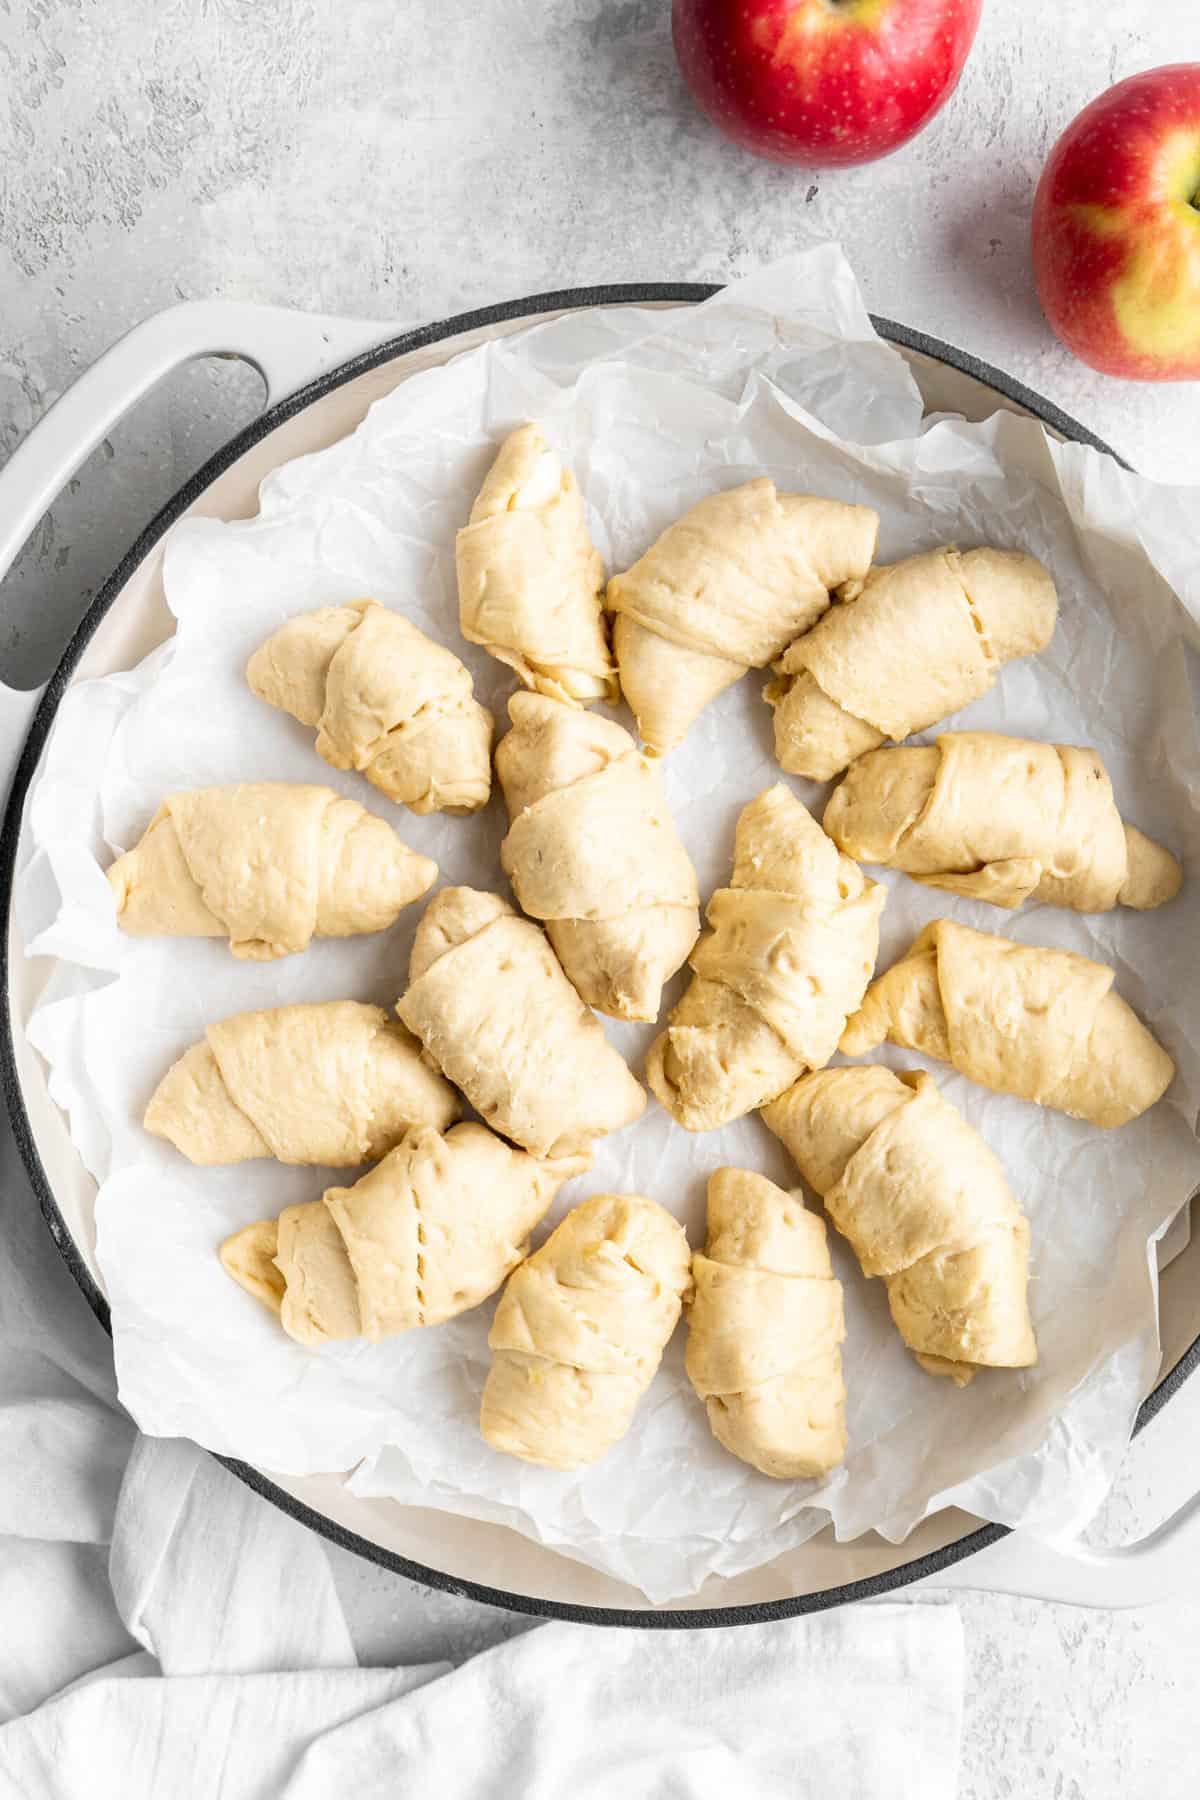 Apple dumplings wrapped up and put into a parchment lined pan